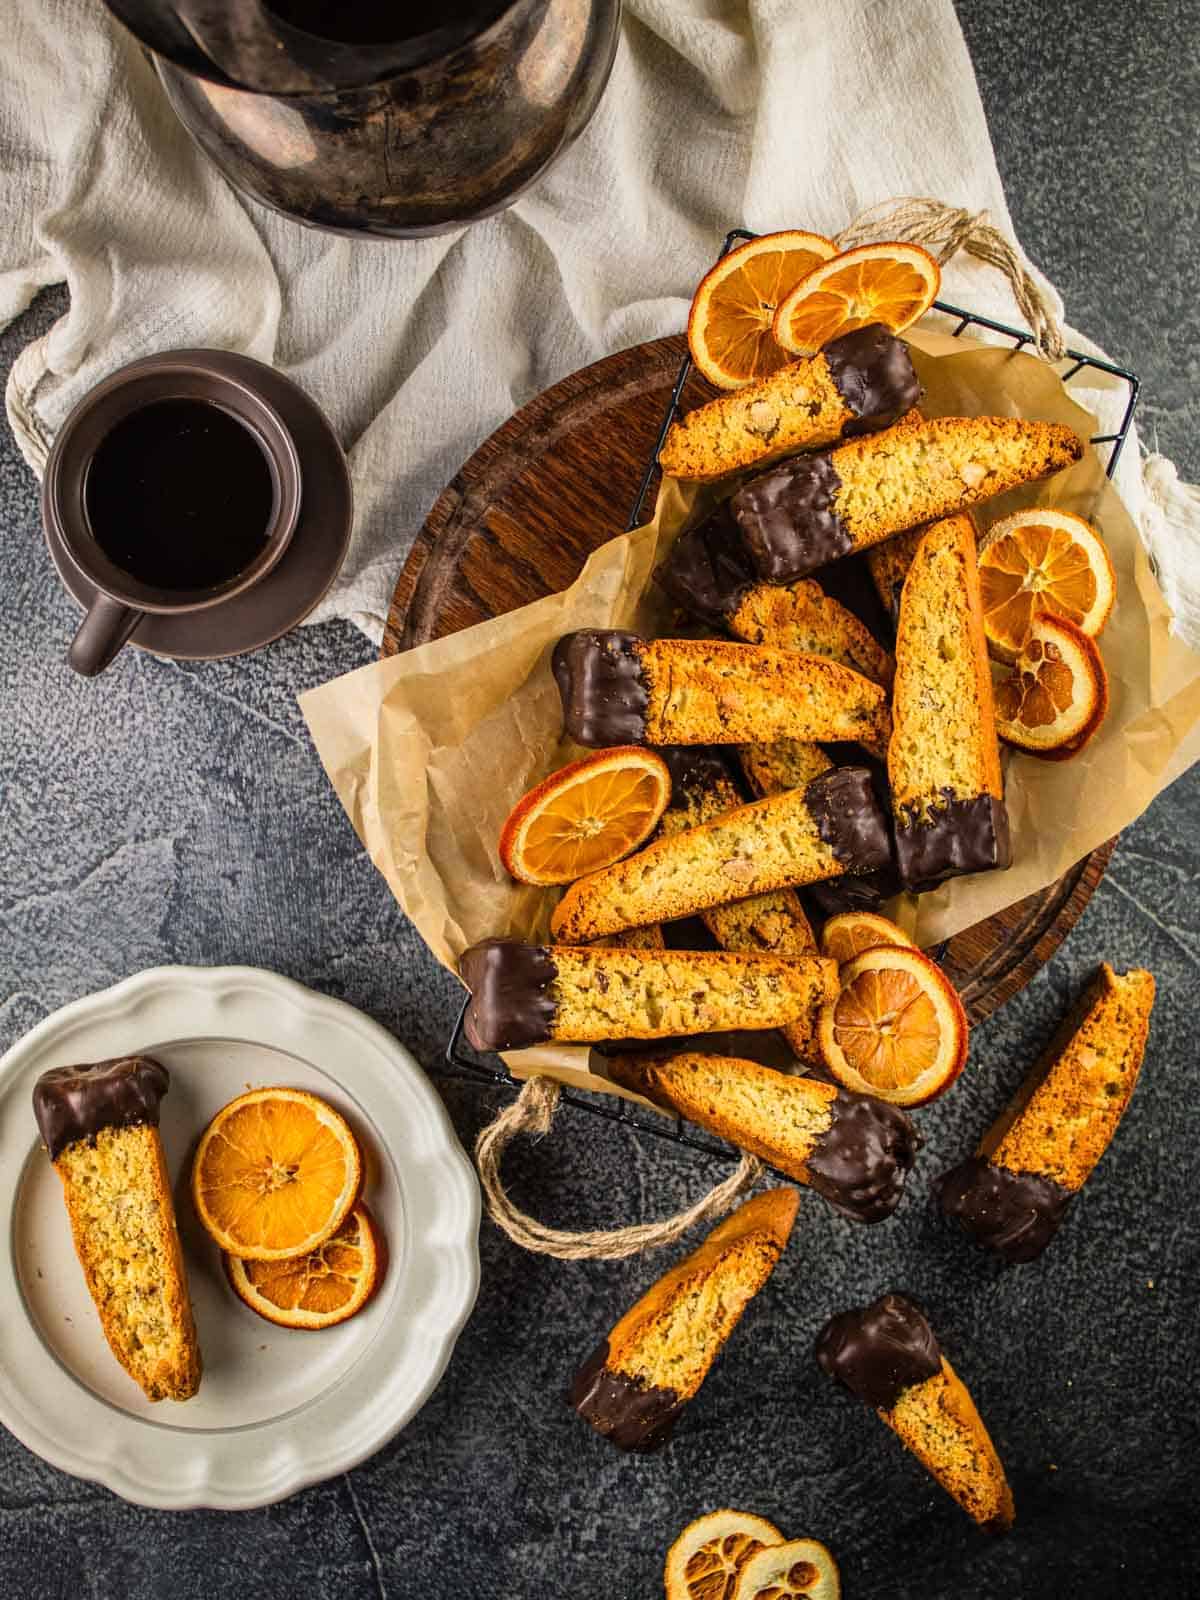 basket of biscotti with ends dipped in chocolate with dried orange slices and cup of coffee